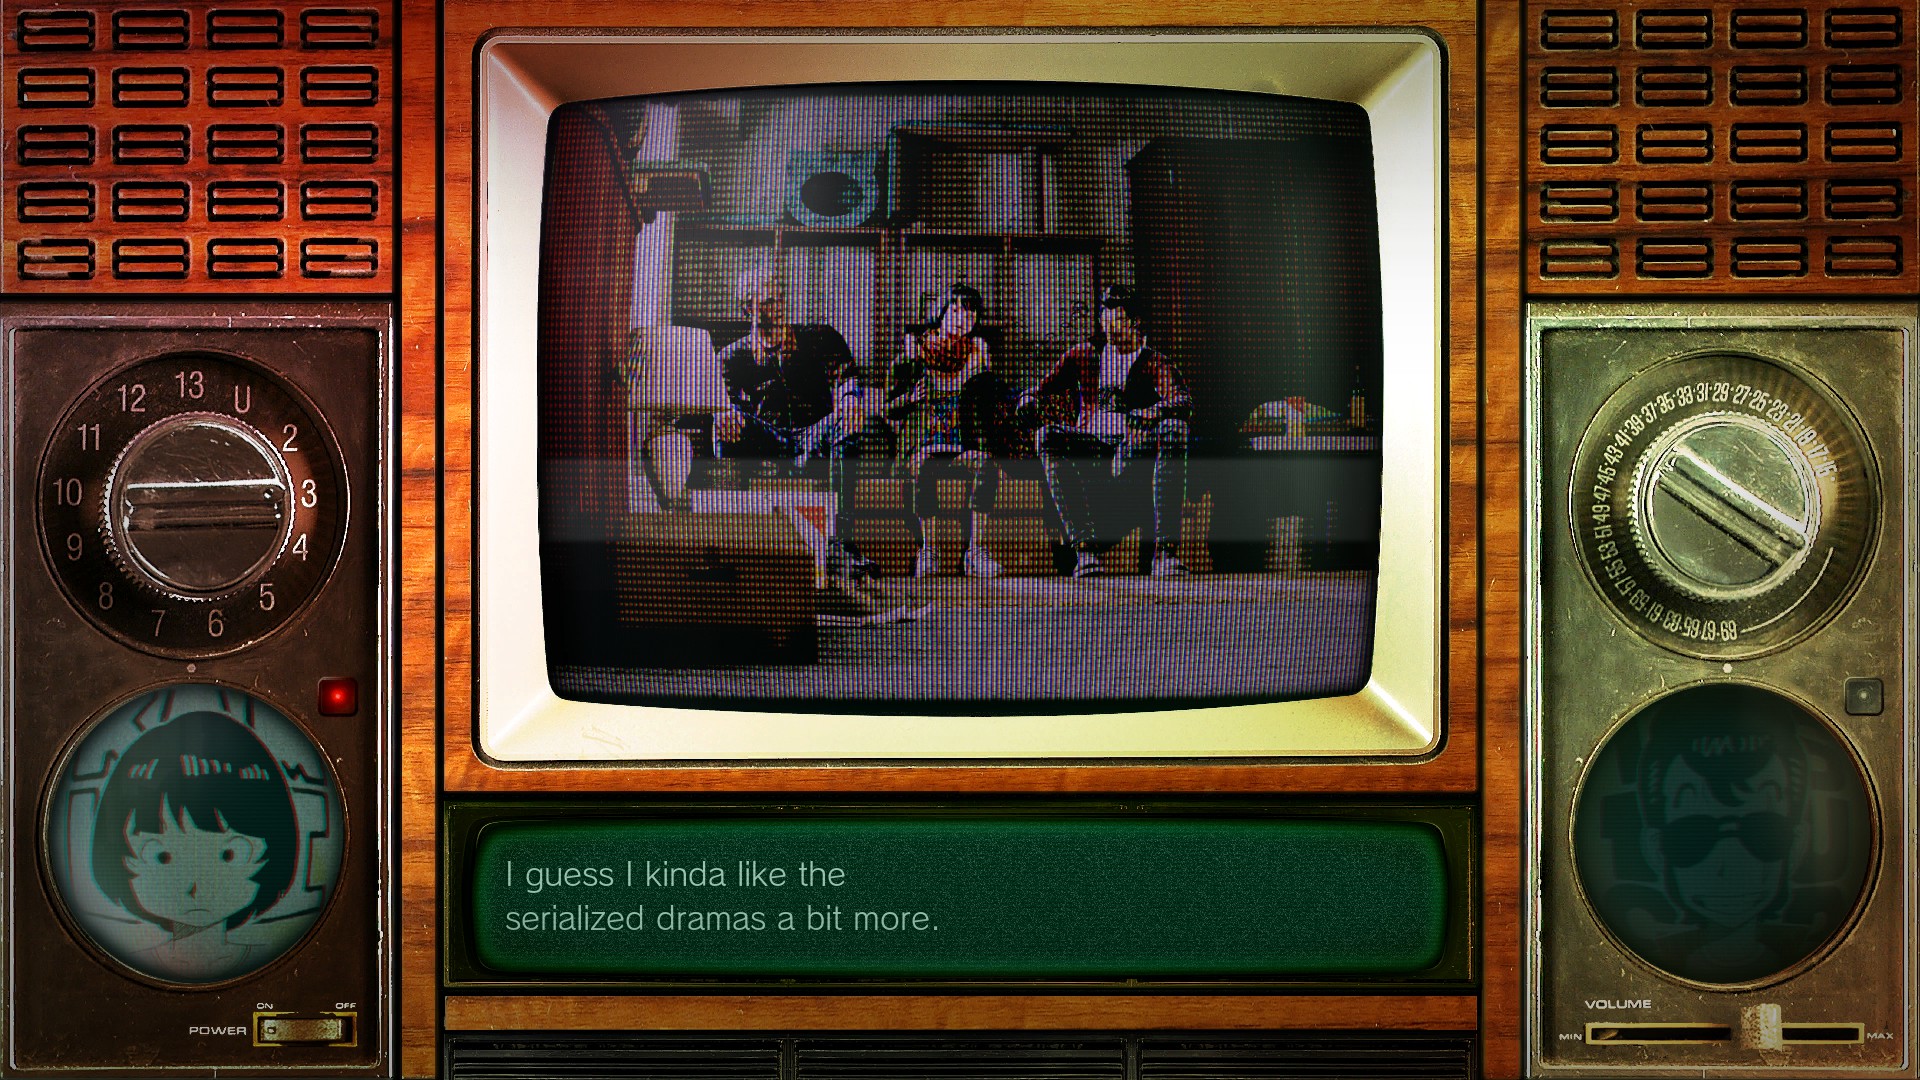 Screenshot from No More Heroes III. An analogue television. On the screen, from left to right, Bell, Newtype Kamui, and Travis sit on a couch. Kamui's subtitles read, "I guess I kinda like the serialized dramas a bit more."